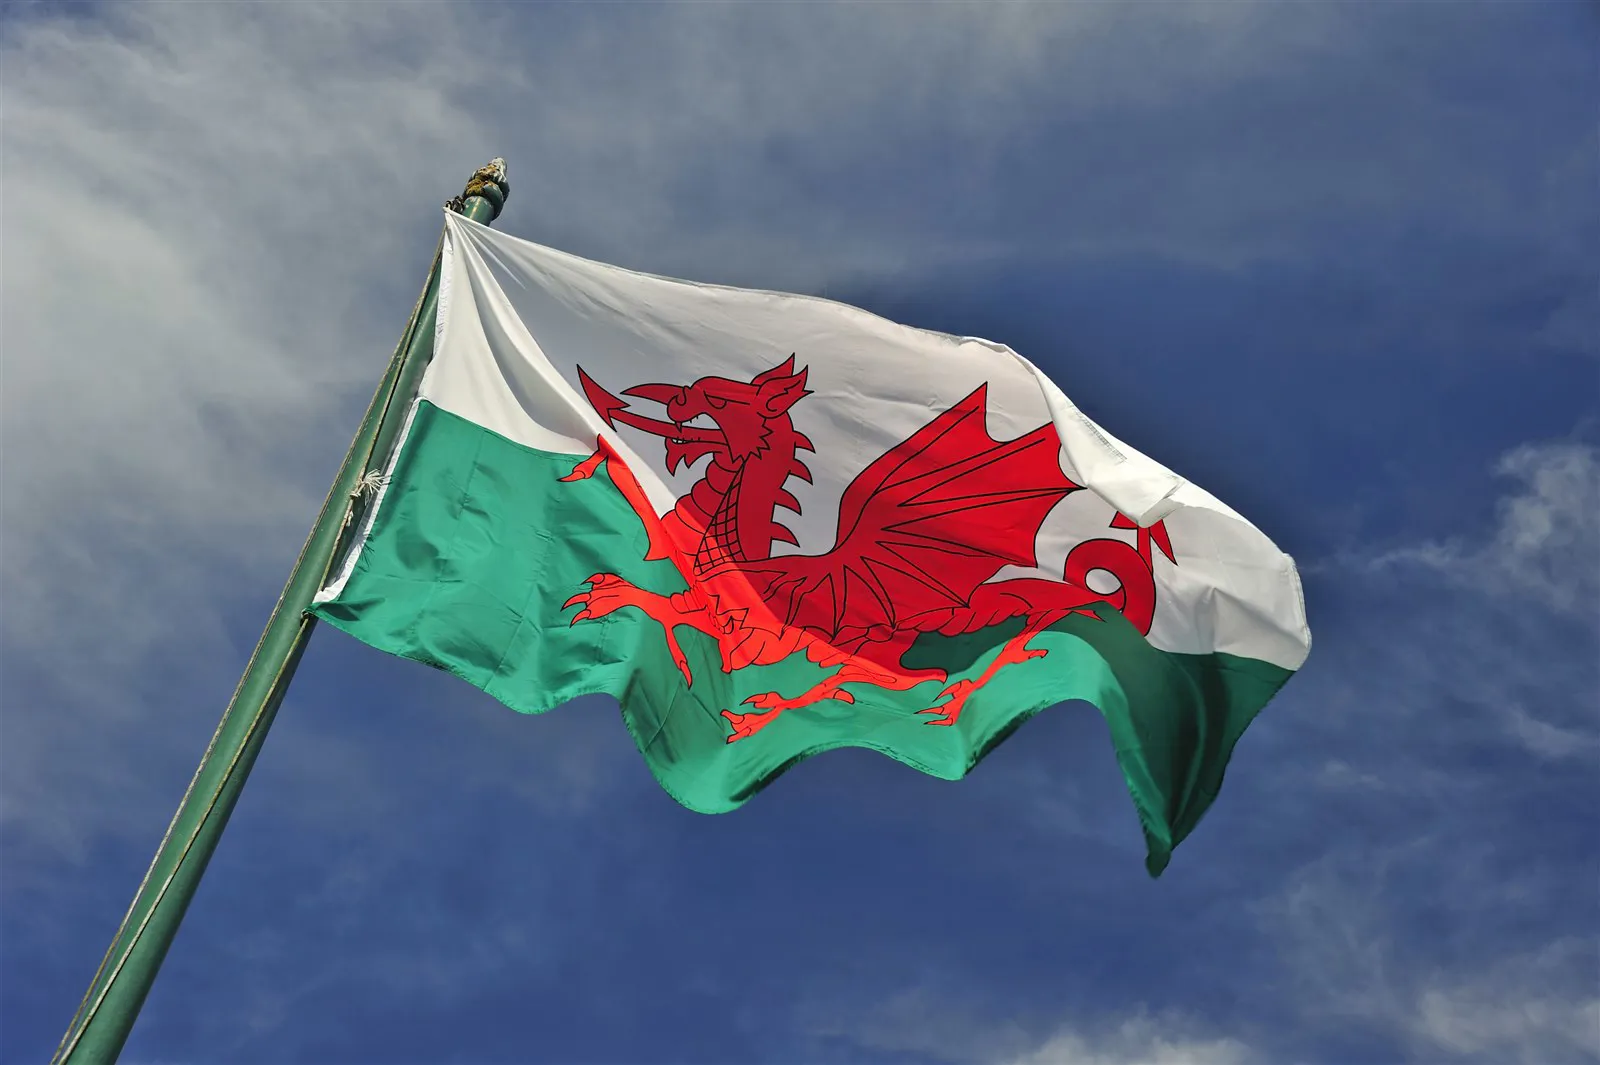 12 interesting facts about Wales